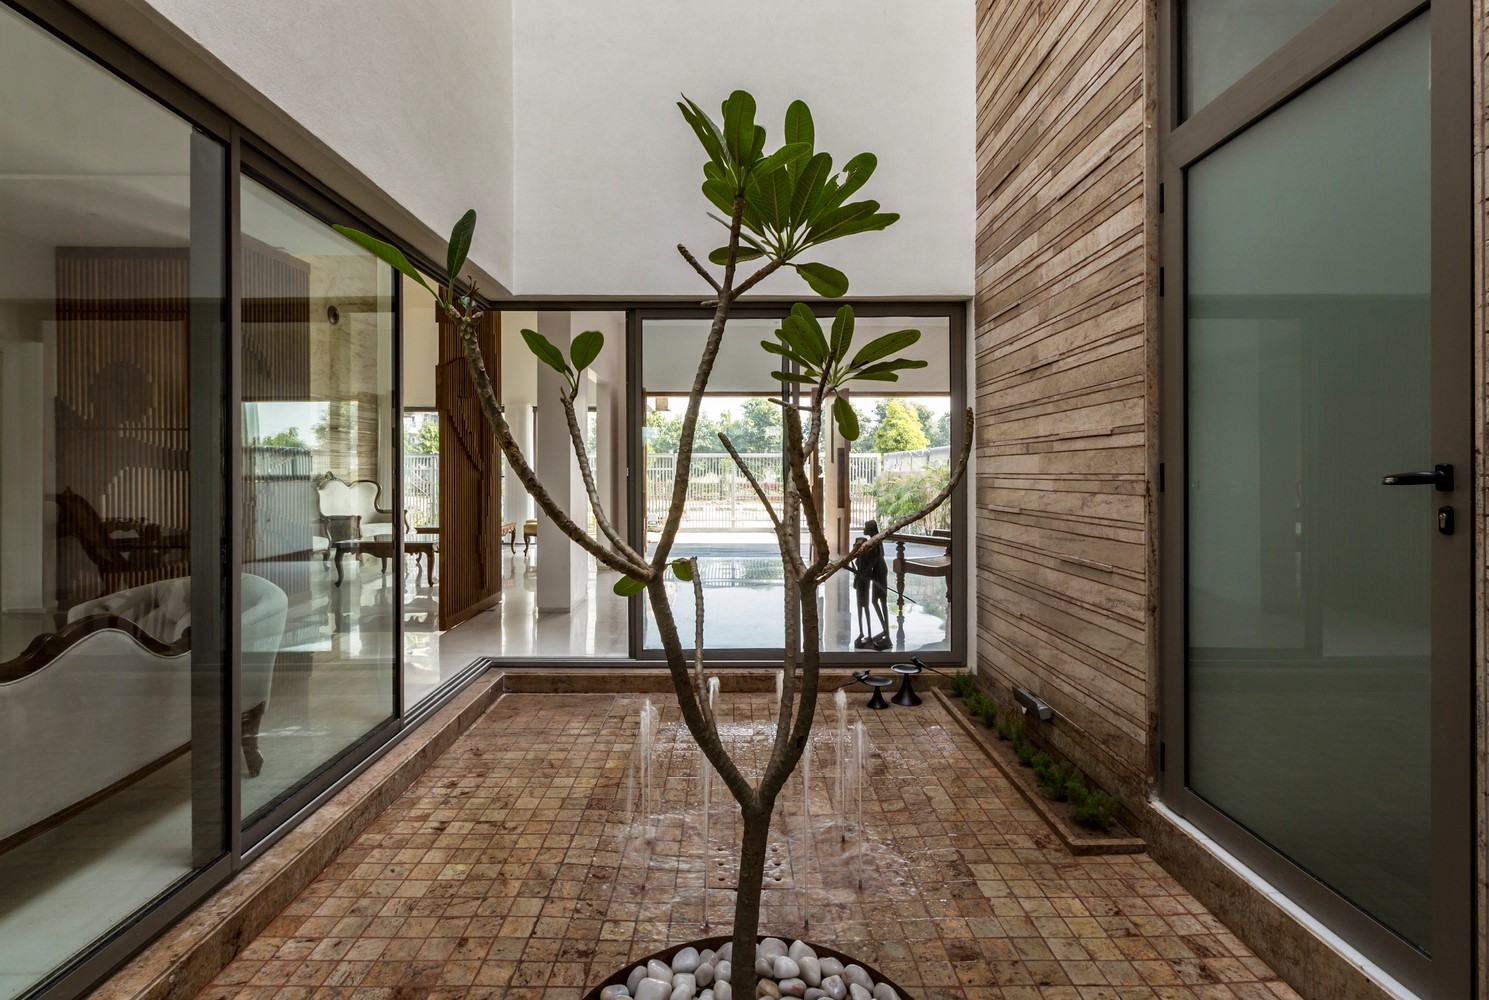  House  Around a Central  Courtyard  Charged Voids The 